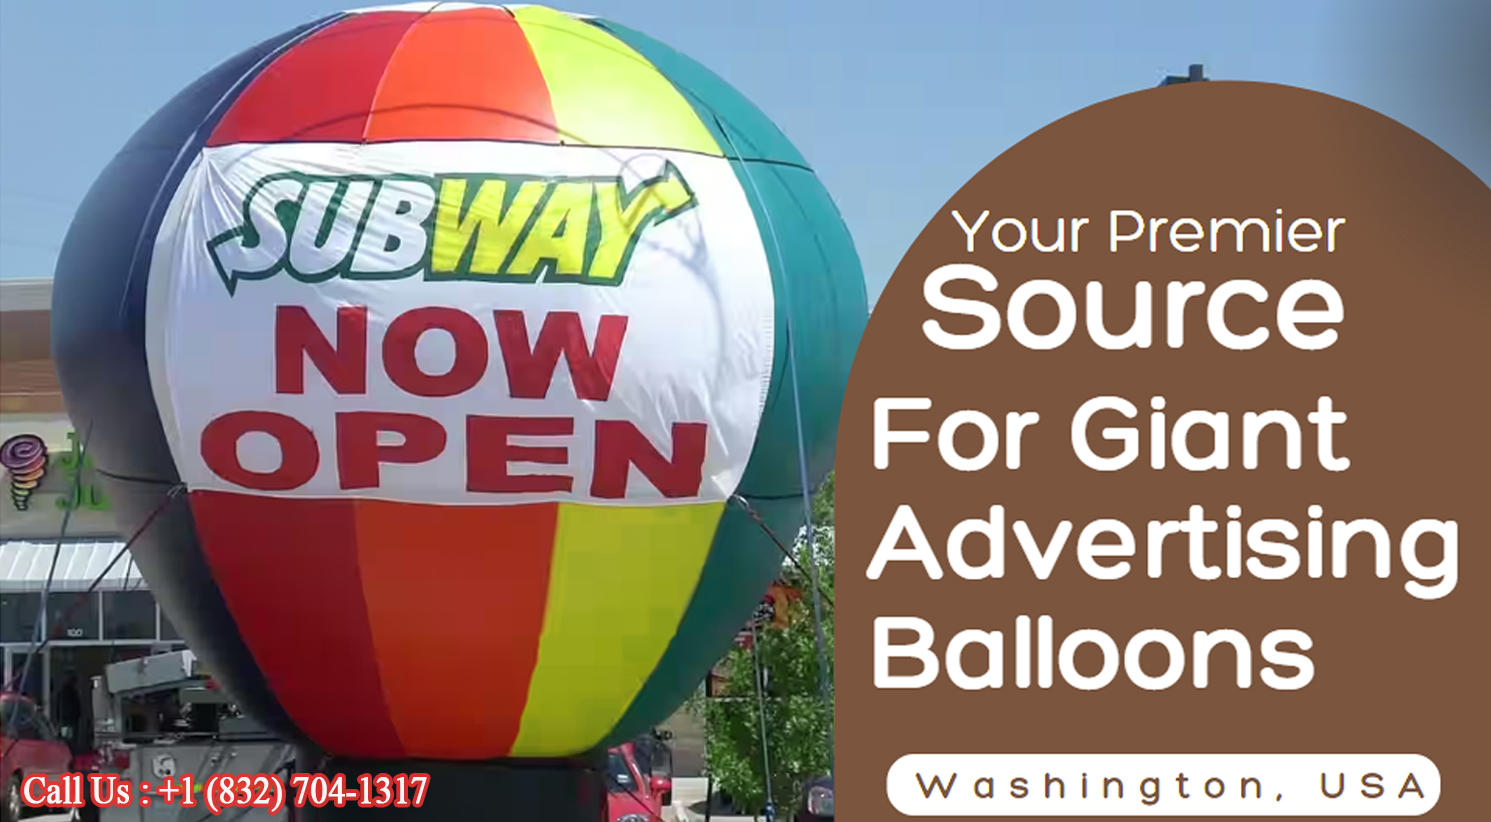 Your Premier Source for Giant Advertising Balloons in the USA